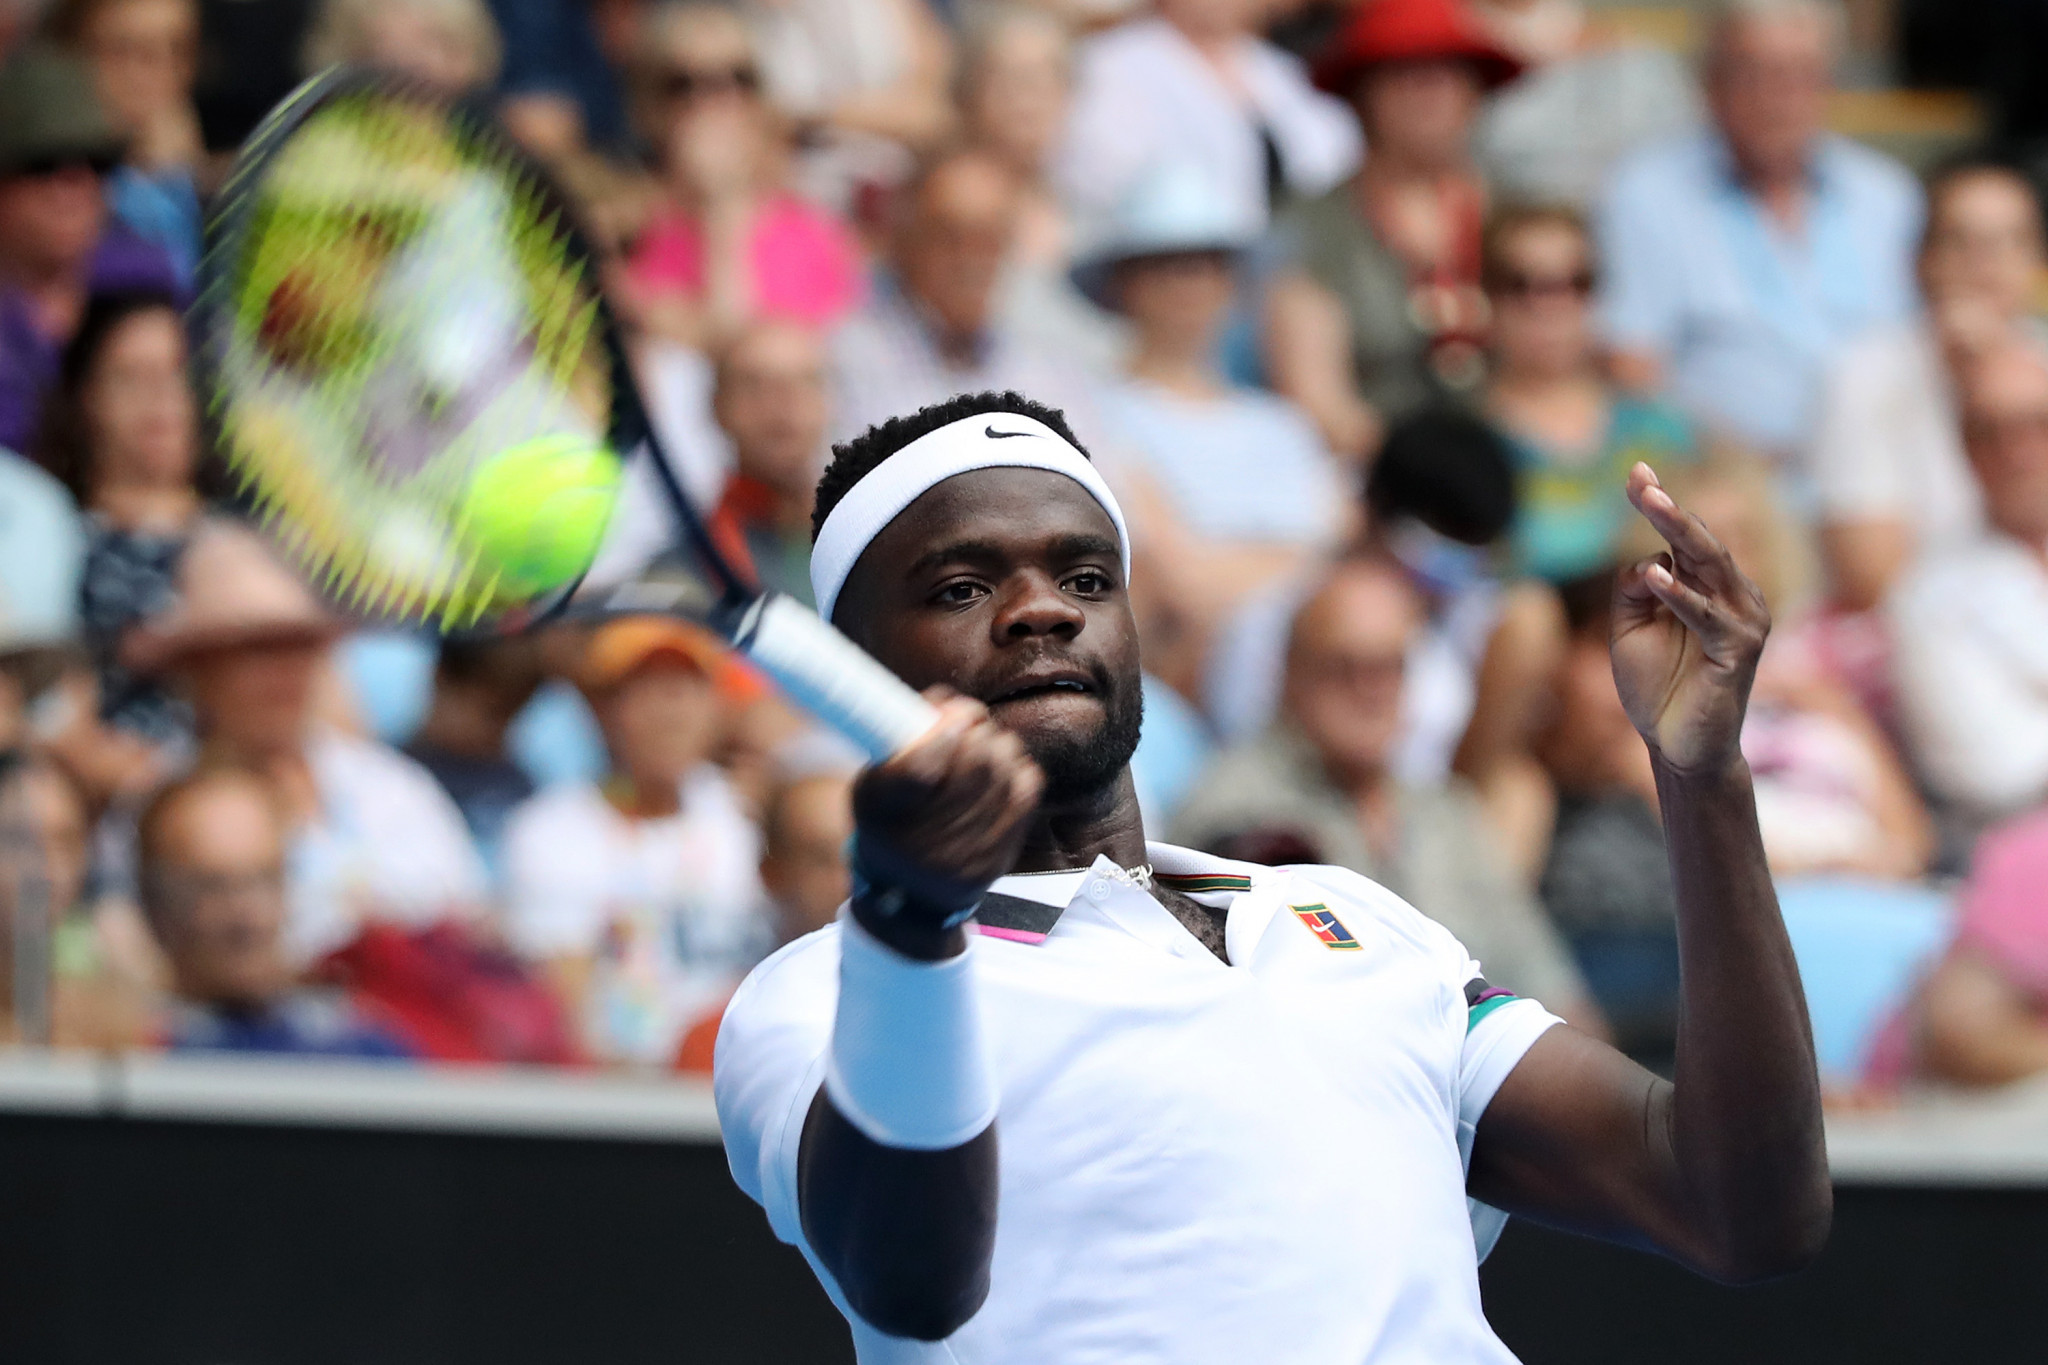 American Frances Tiafoe fought back from a set down to beat last year's Wimbledon finalist ©Getty Images